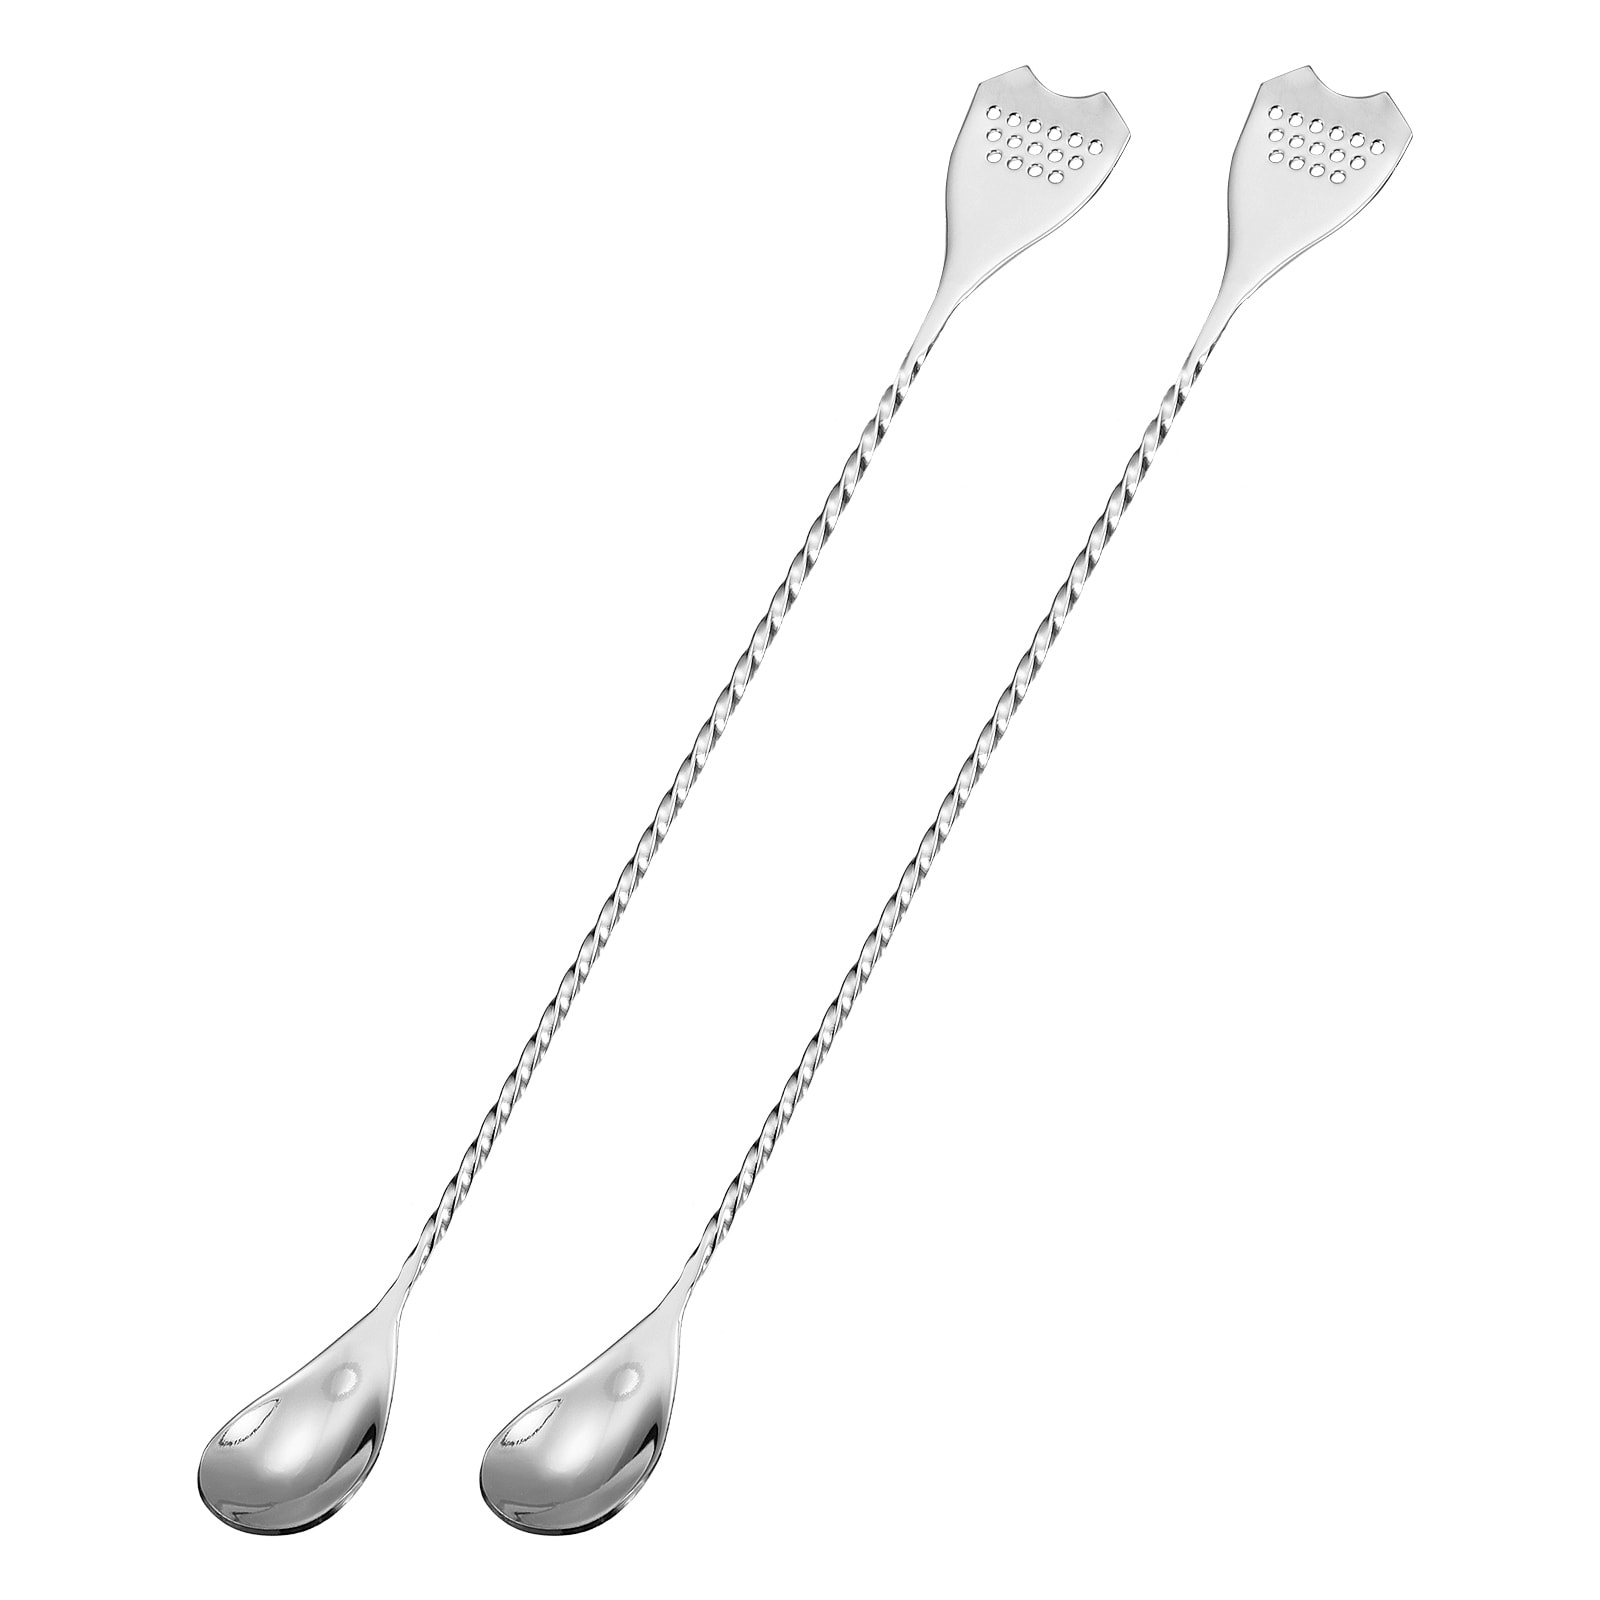 https://ak1.ostkcdn.com/images/products/is/images/direct/7b2ed04f6b660891add08baaf00225410e78f160/2Pcs-12-Inch-Bar-Spoon-Cocktail-Mixing-Spoon-Double-Head-Stirrer.jpg